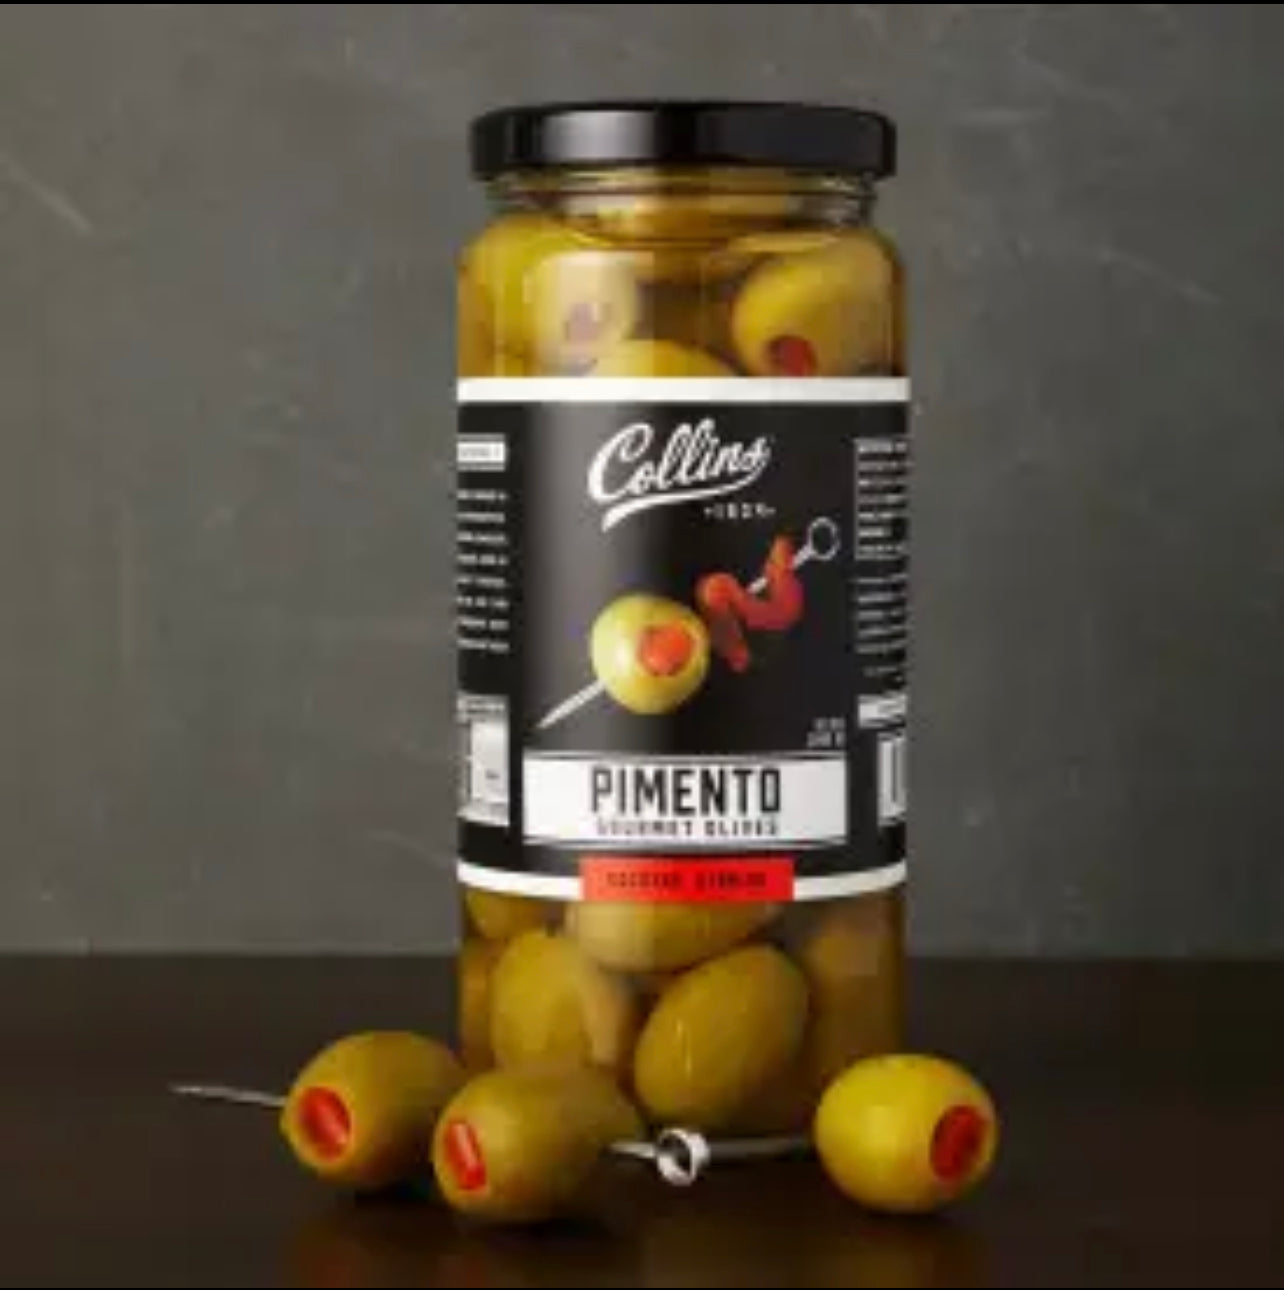 jar of pimento gourmet spanish olives by Collins displayed on a dark surface with some of the olives pictured on a cocktail pick